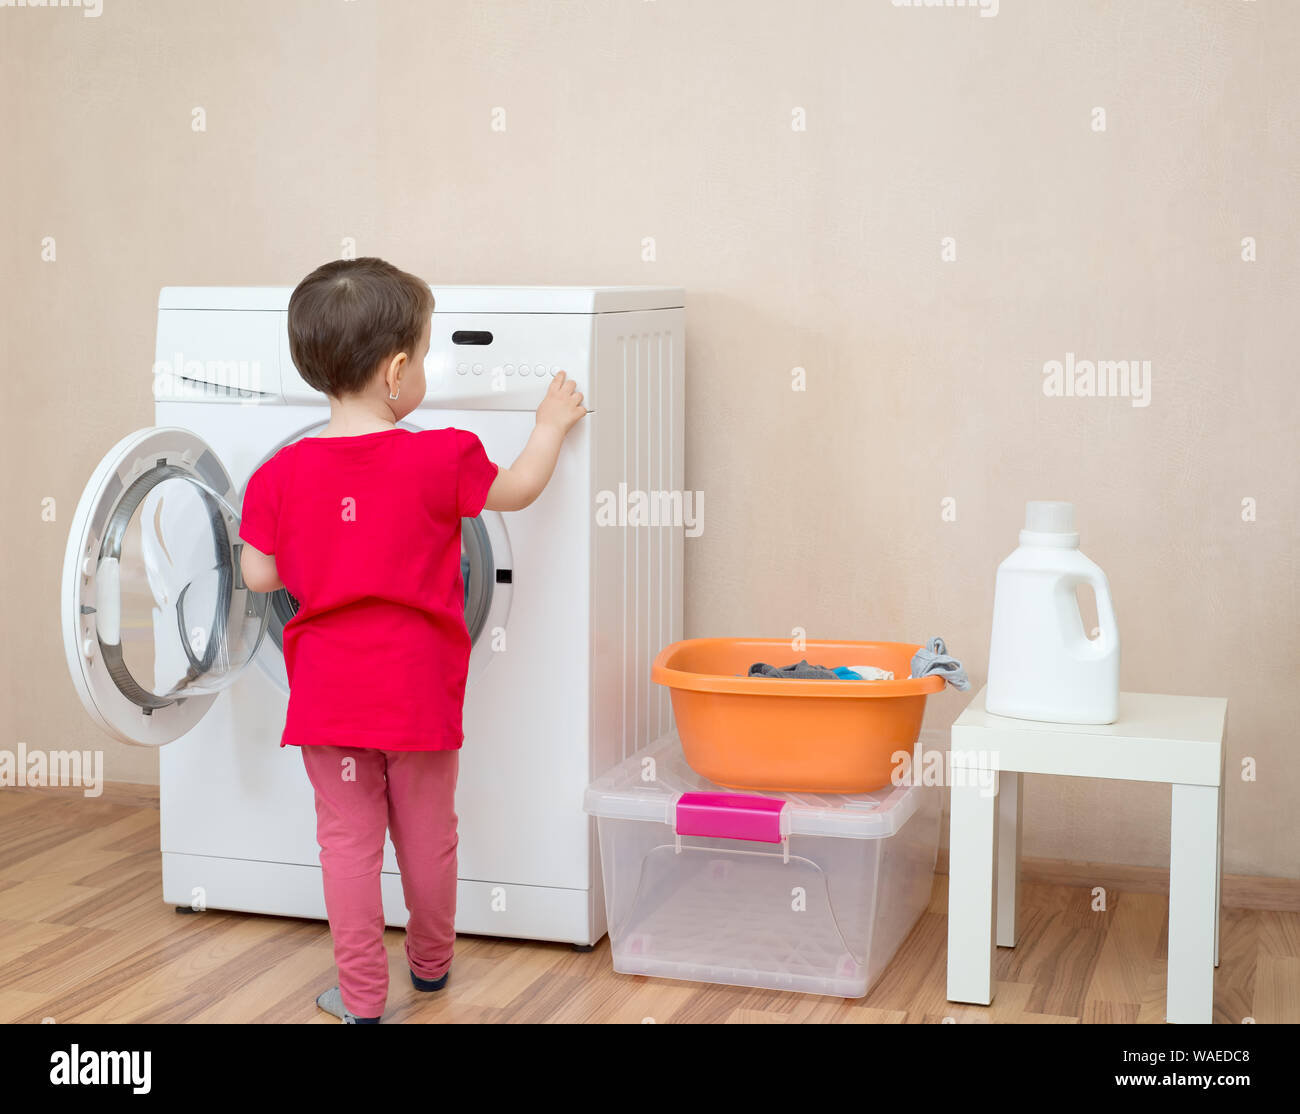 Little girl and washing machine in the background Stock Photo